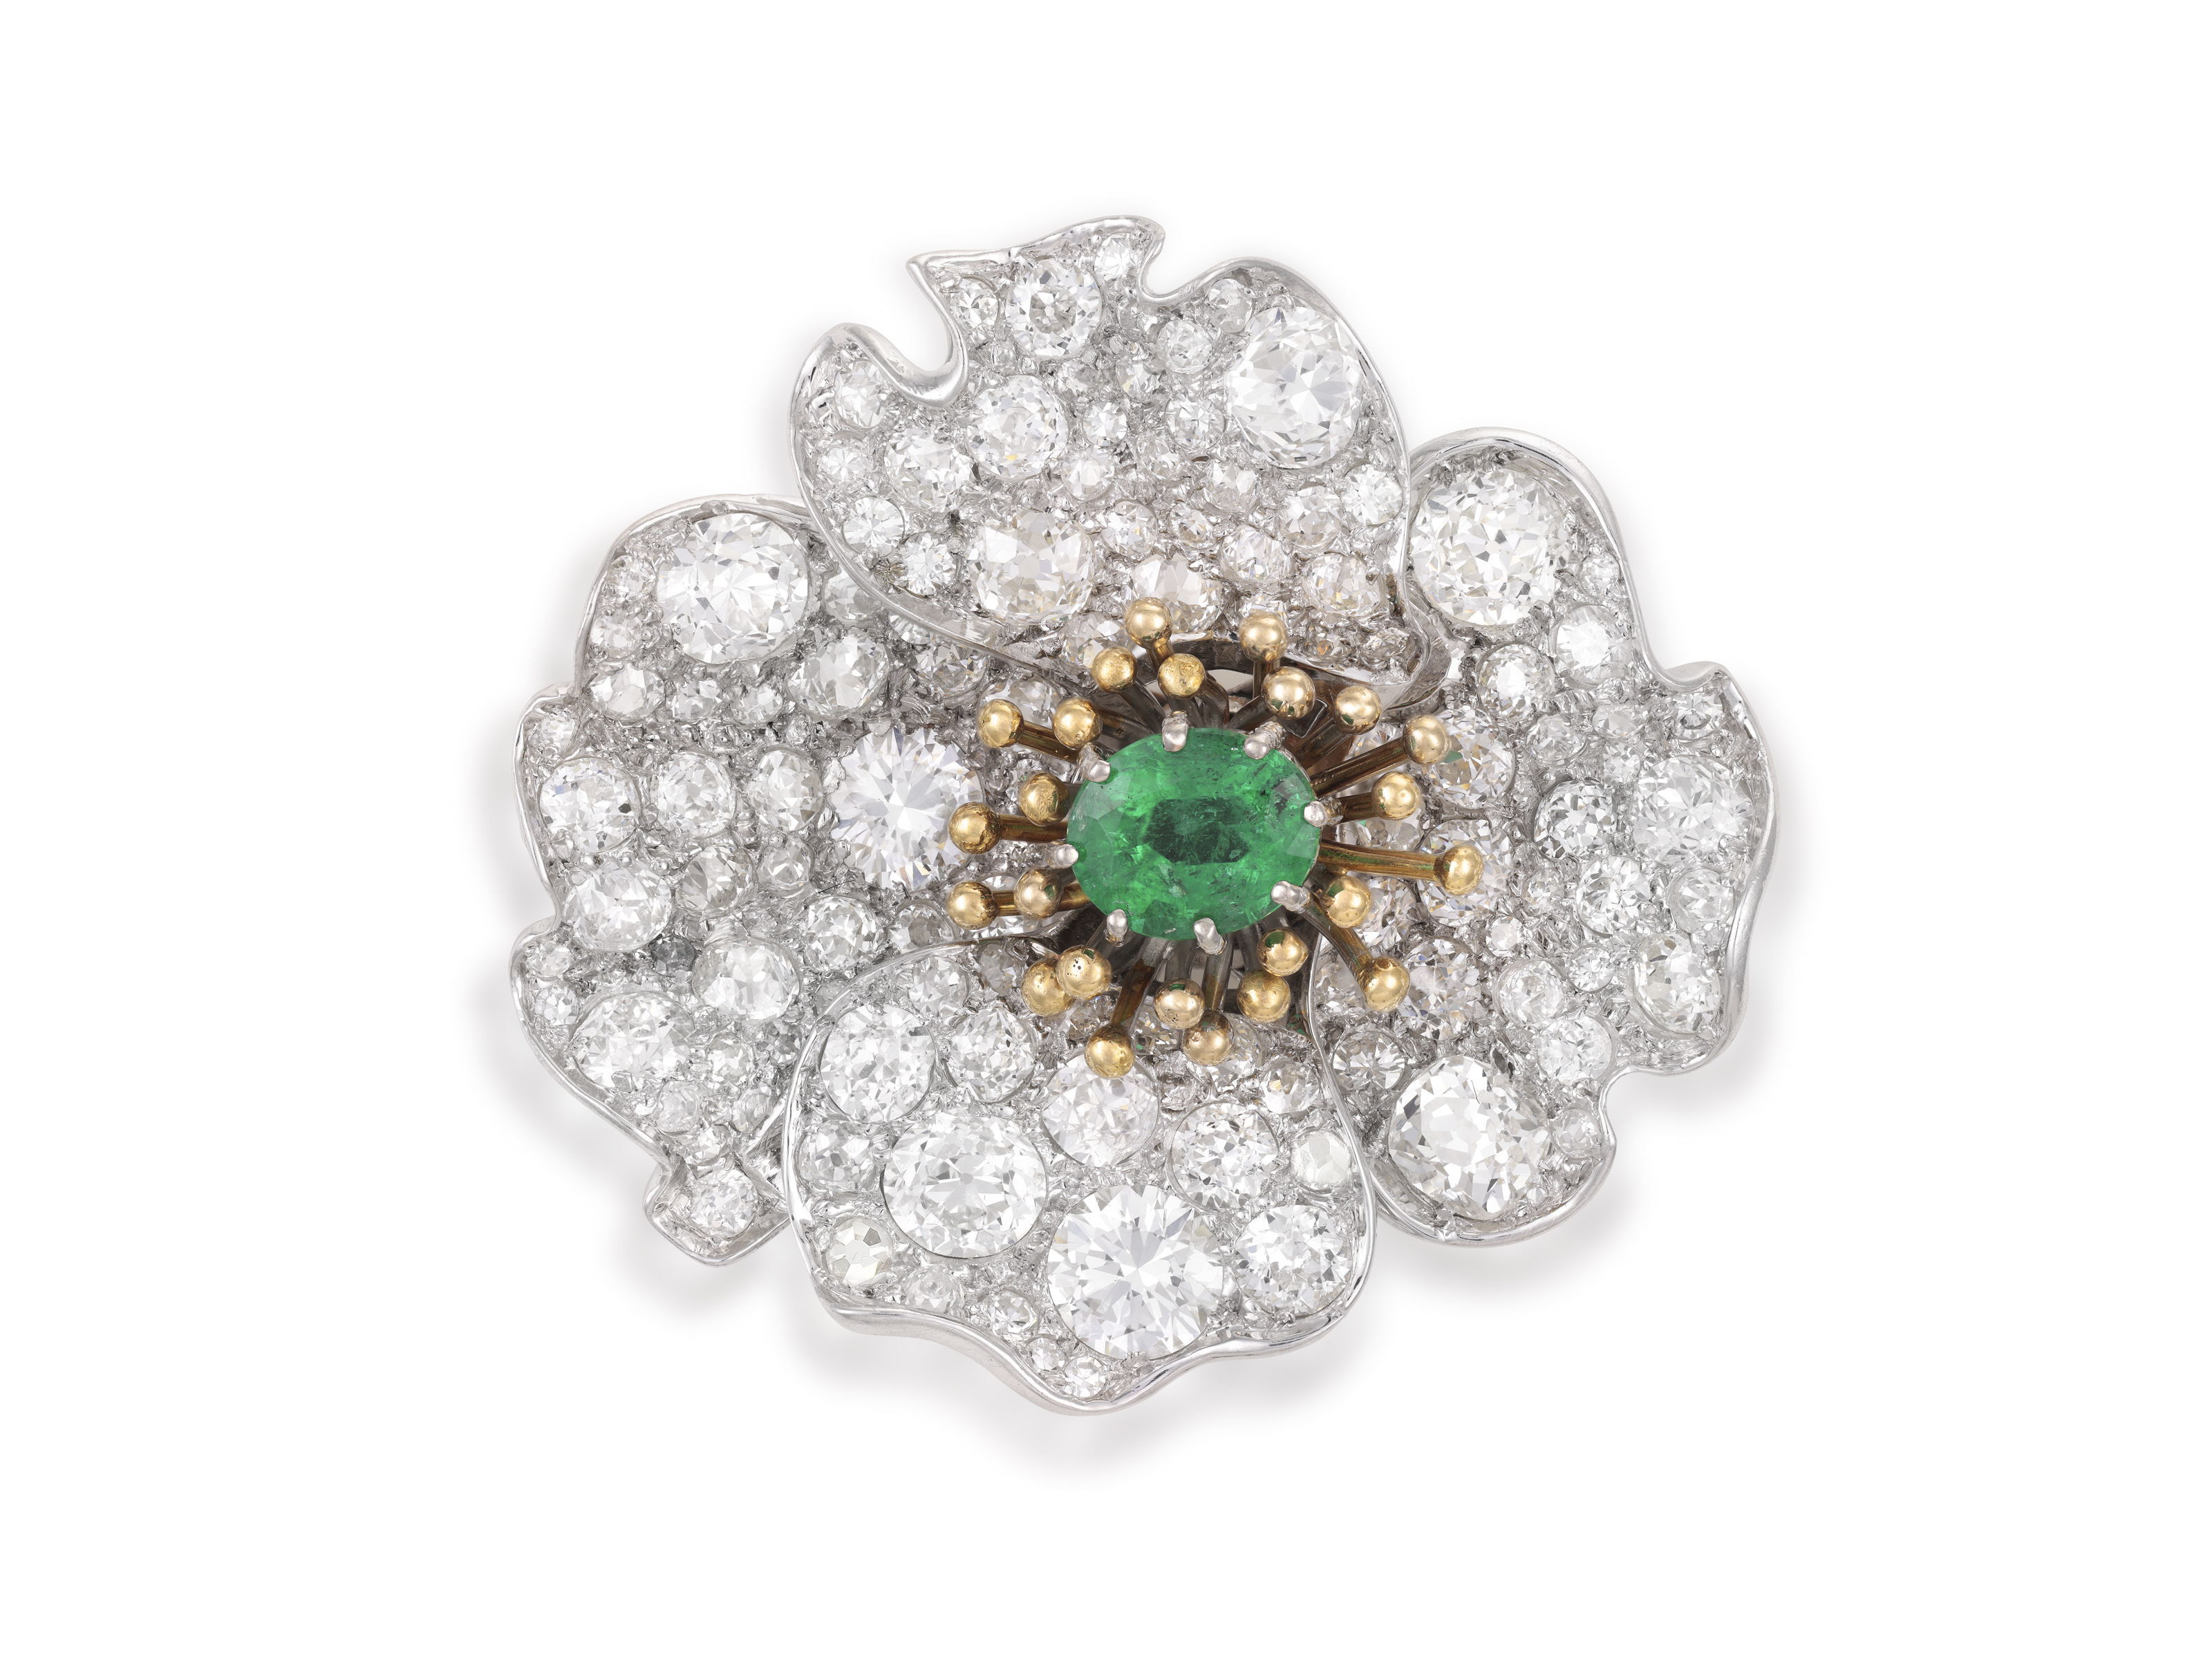 A LATE 19TH/ EARLY 20TH CENTURY EMERALD AND DIAMOND BROOCH Designed as a stylised flowerhead,